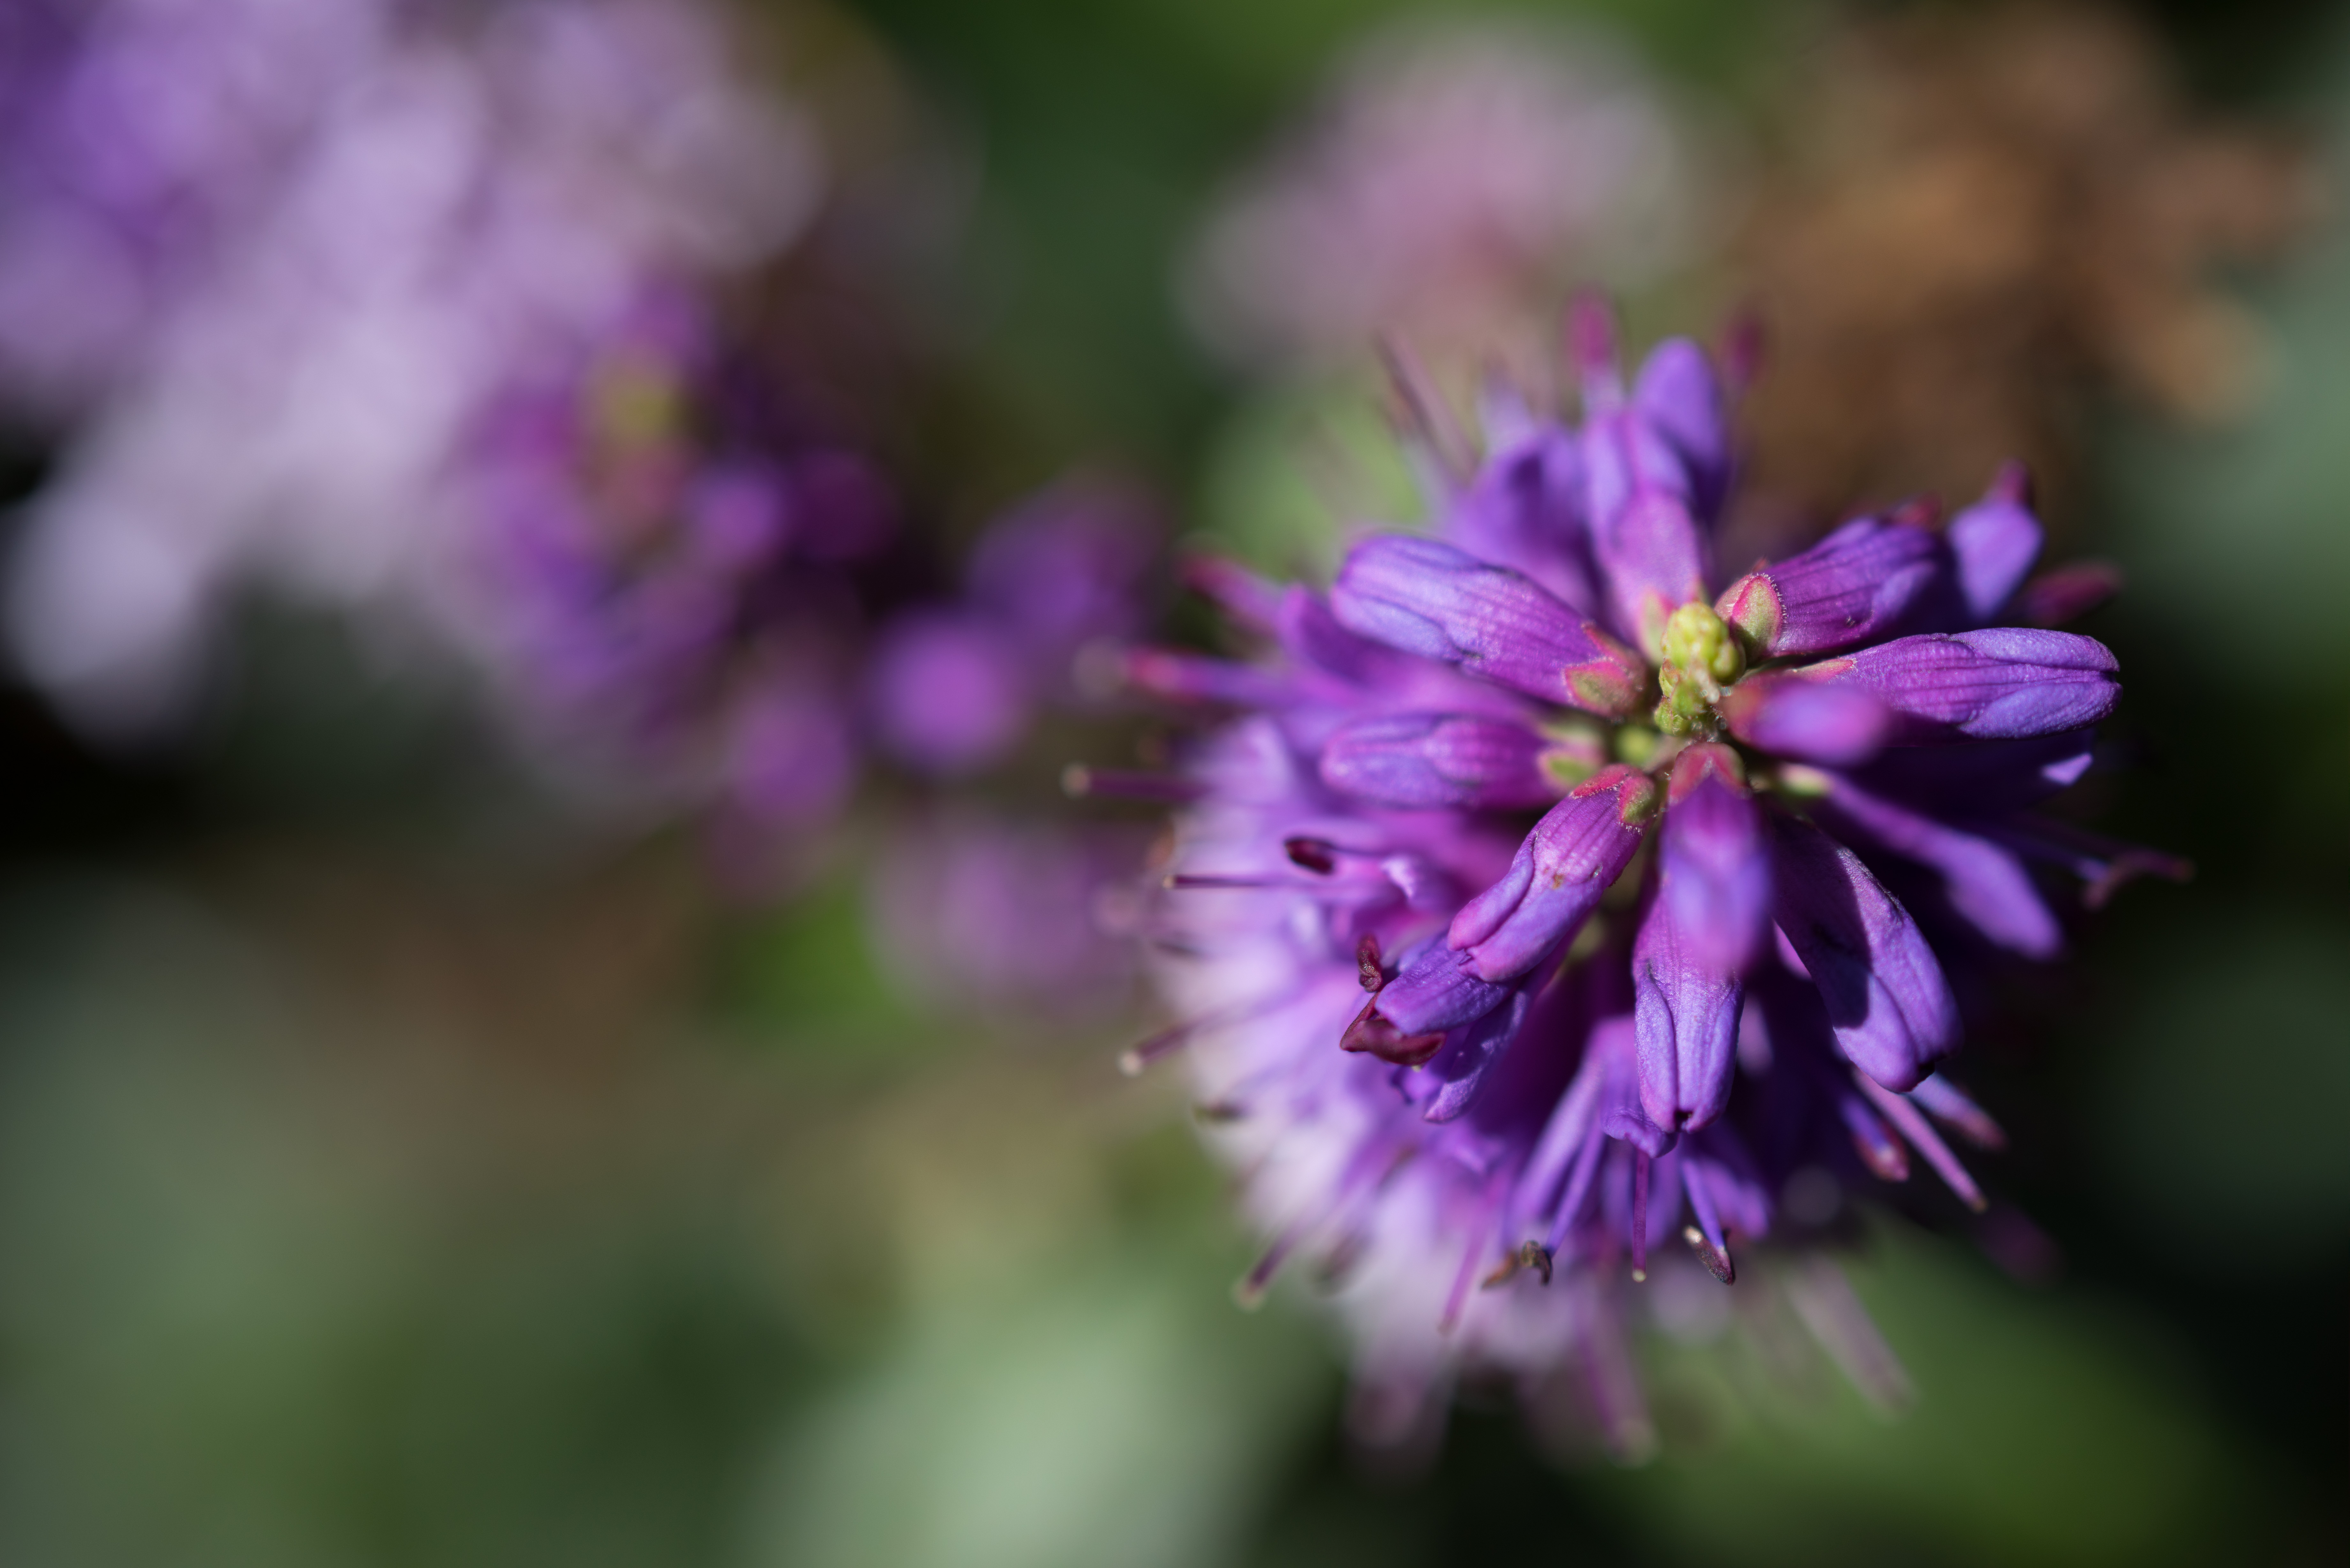 Sony FE 50mm F2.8 Macro Review - Sample Images | Photography Blog